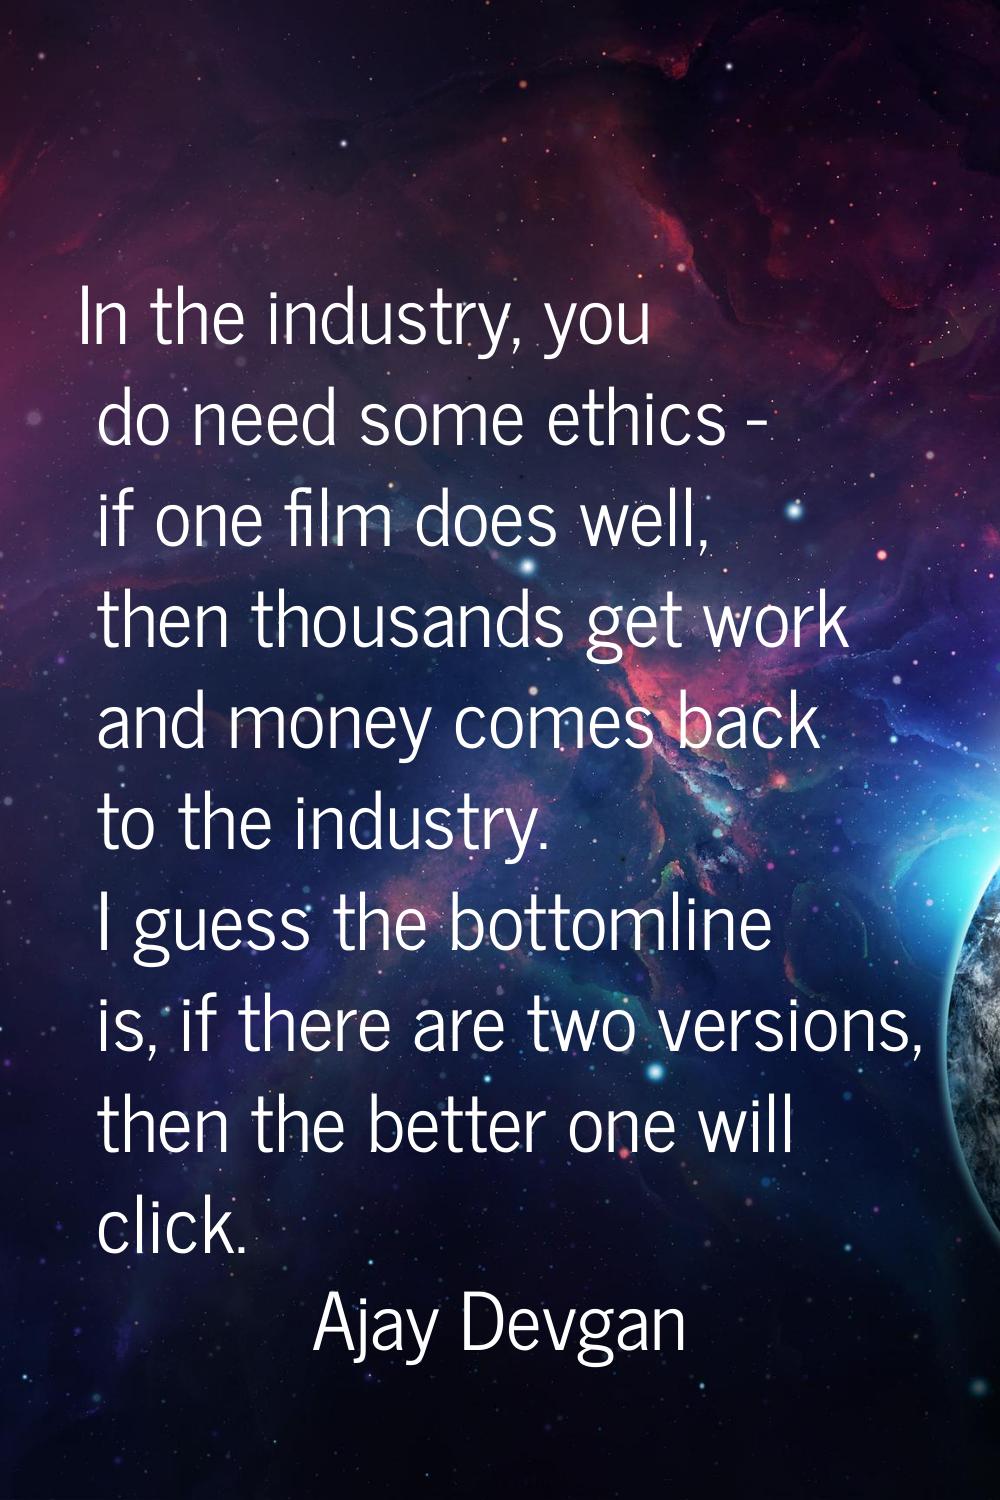 In the industry, you do need some ethics - if one film does well, then thousands get work and money